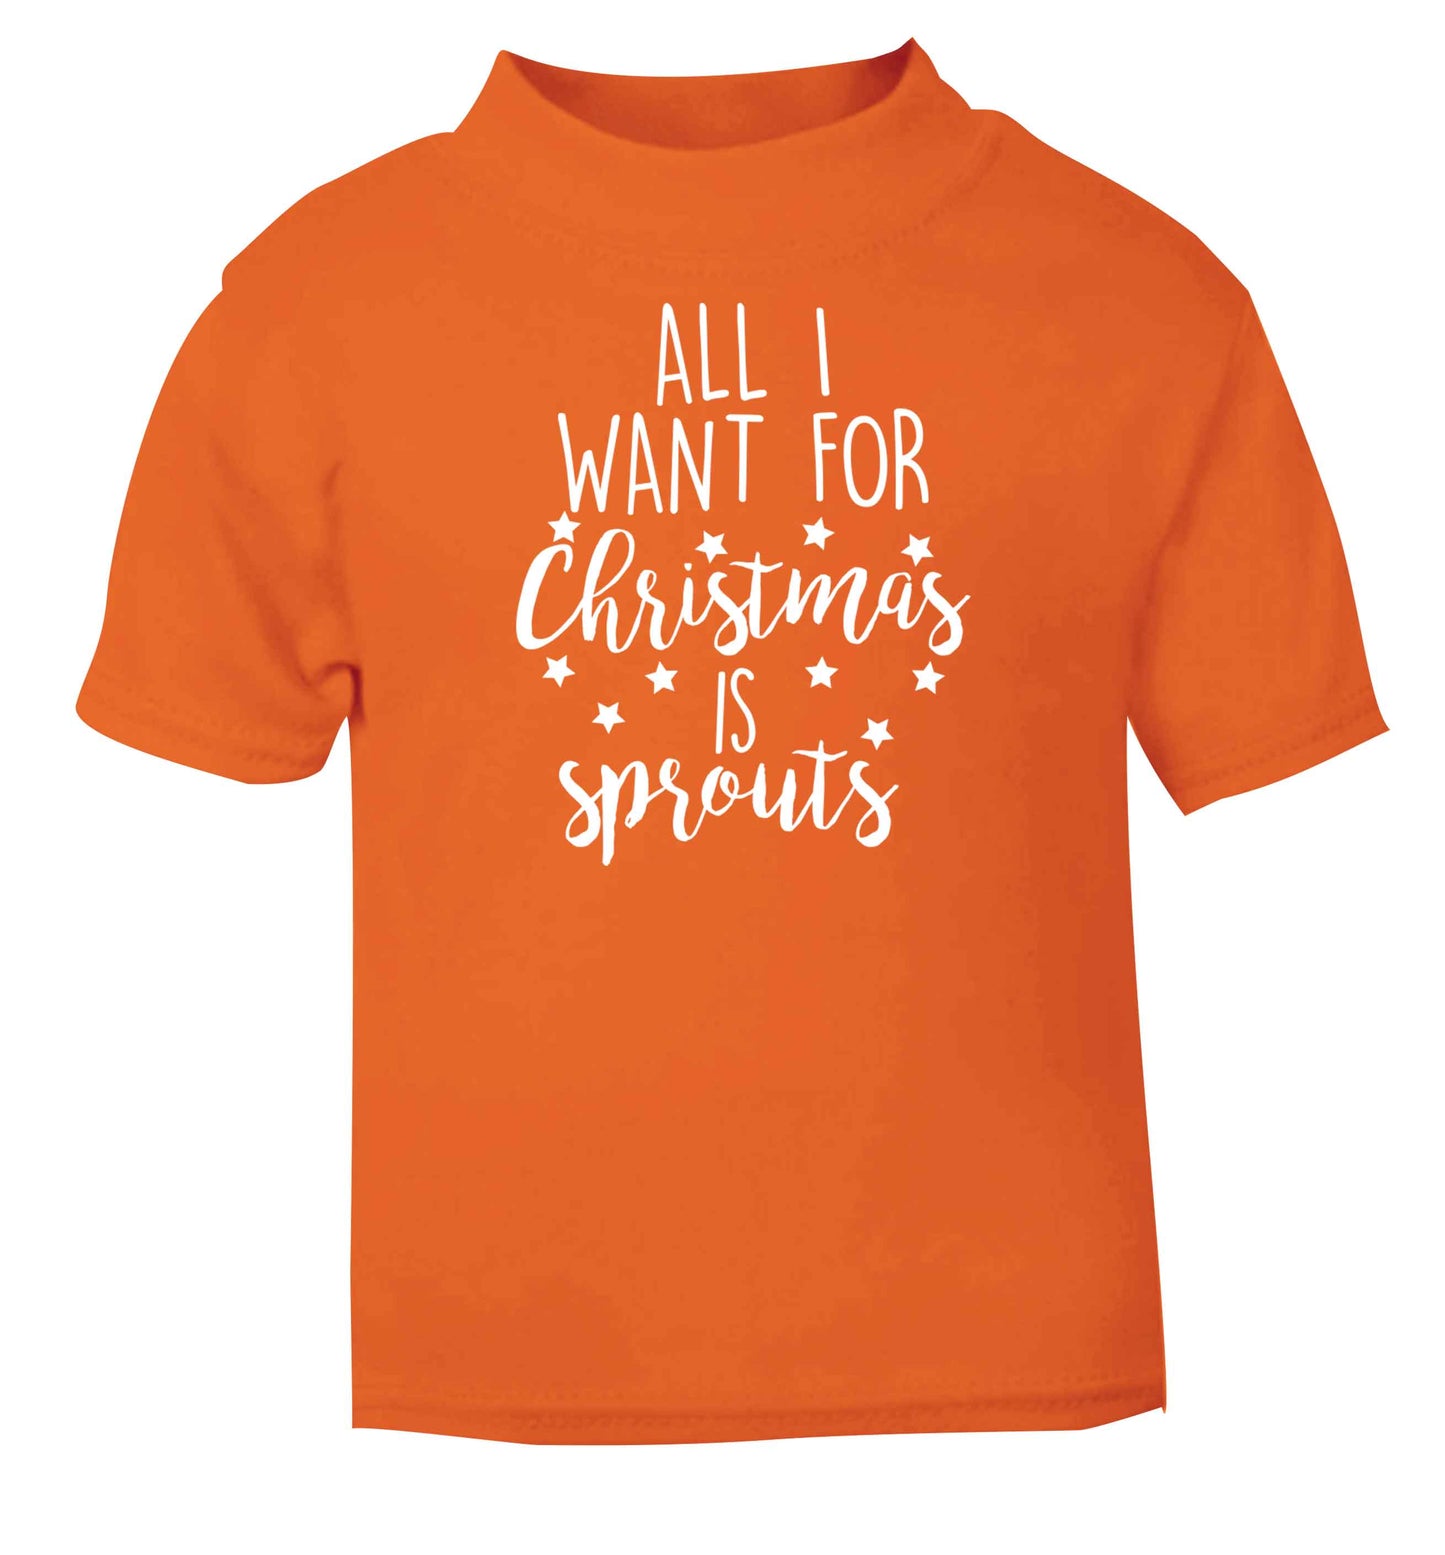 All I want for Christmas is sprouts orange baby toddler Tshirt 2 Years